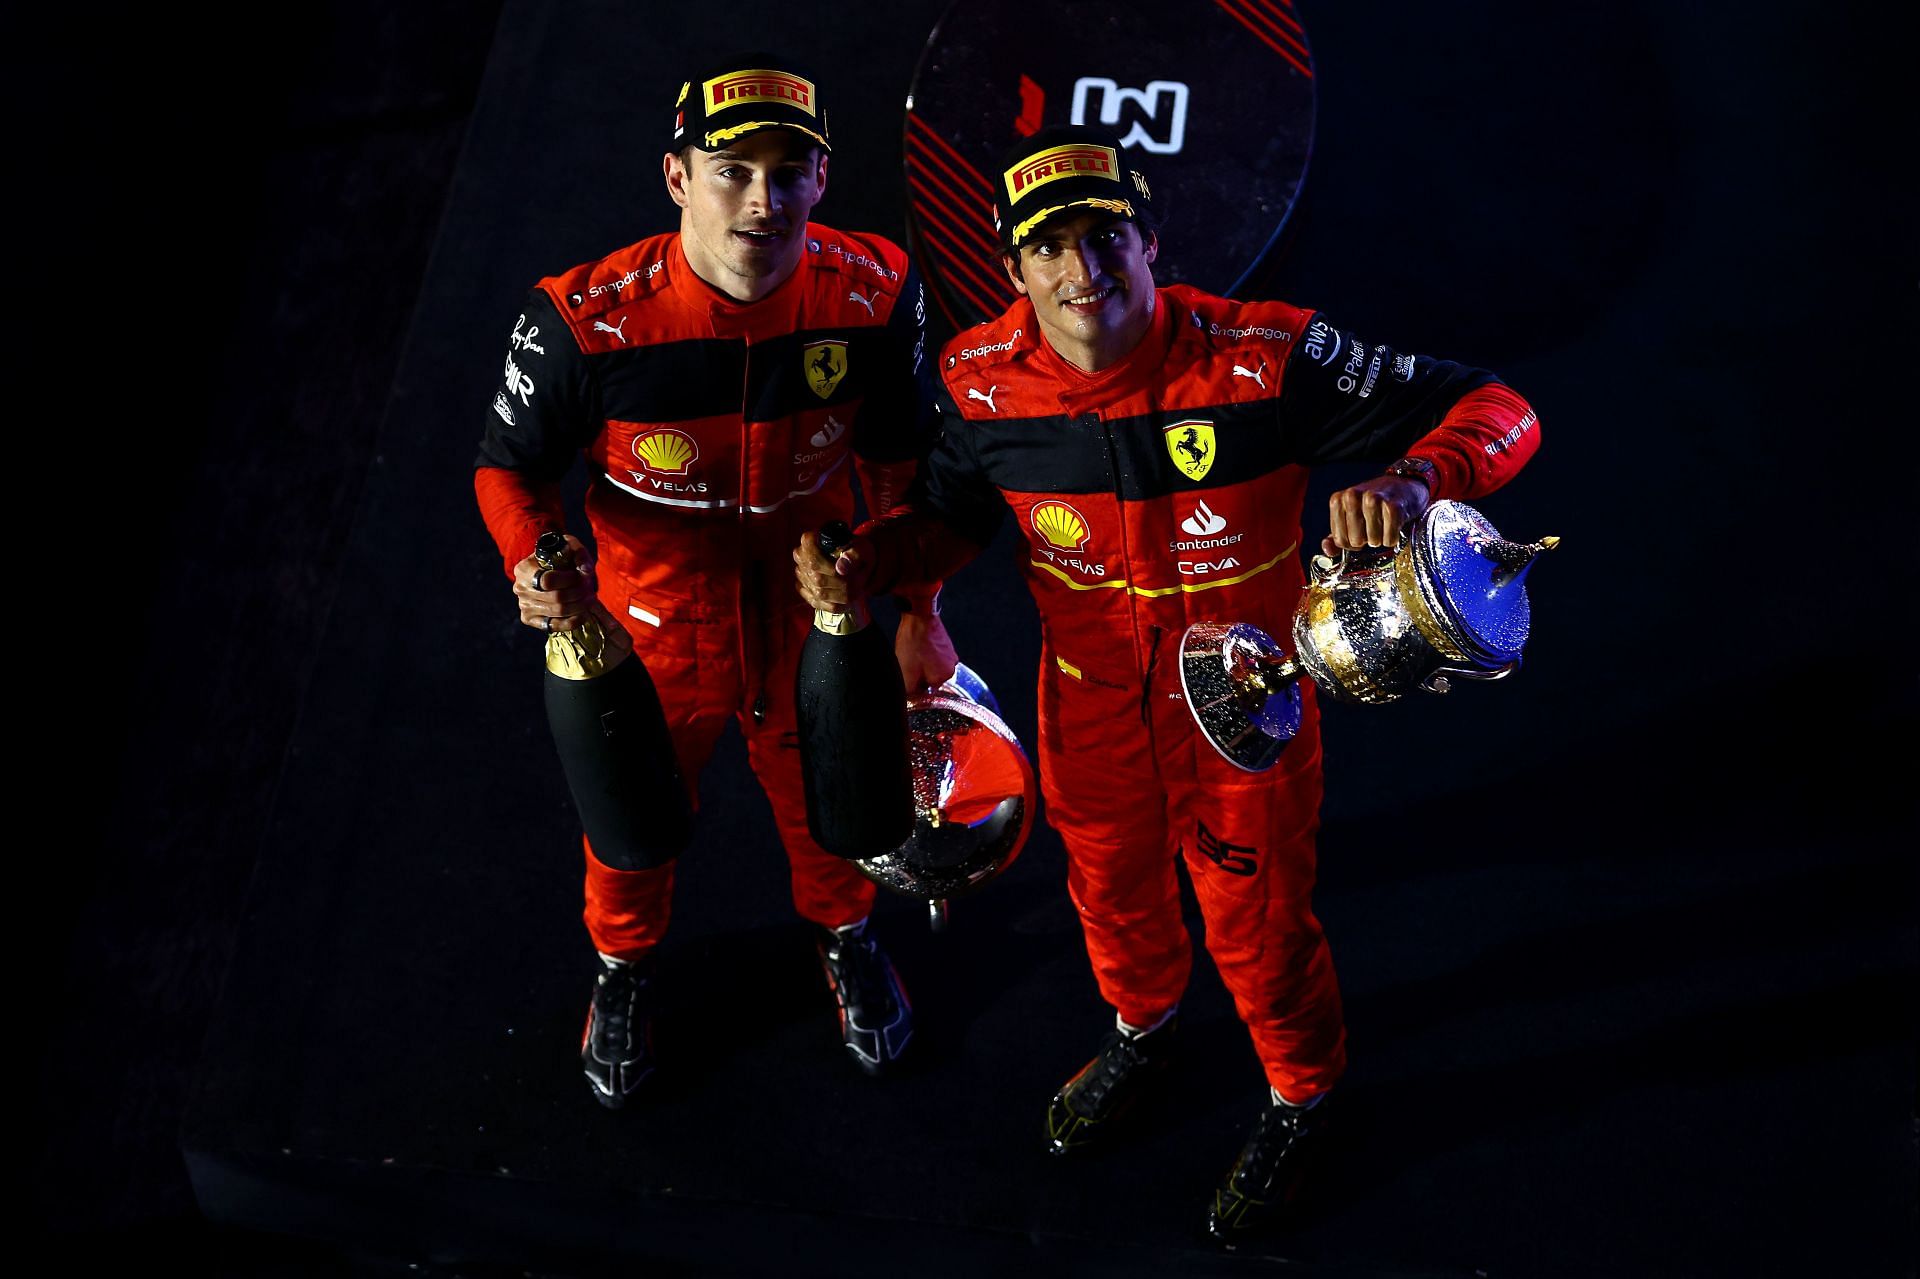 Ferrari drivers Charles Leclerc (left) and Carlos Sainz (right) celebrate on the podium of the 2022 F1 Bahrain GP. (Photo by Mark Thompson/Getty Images)